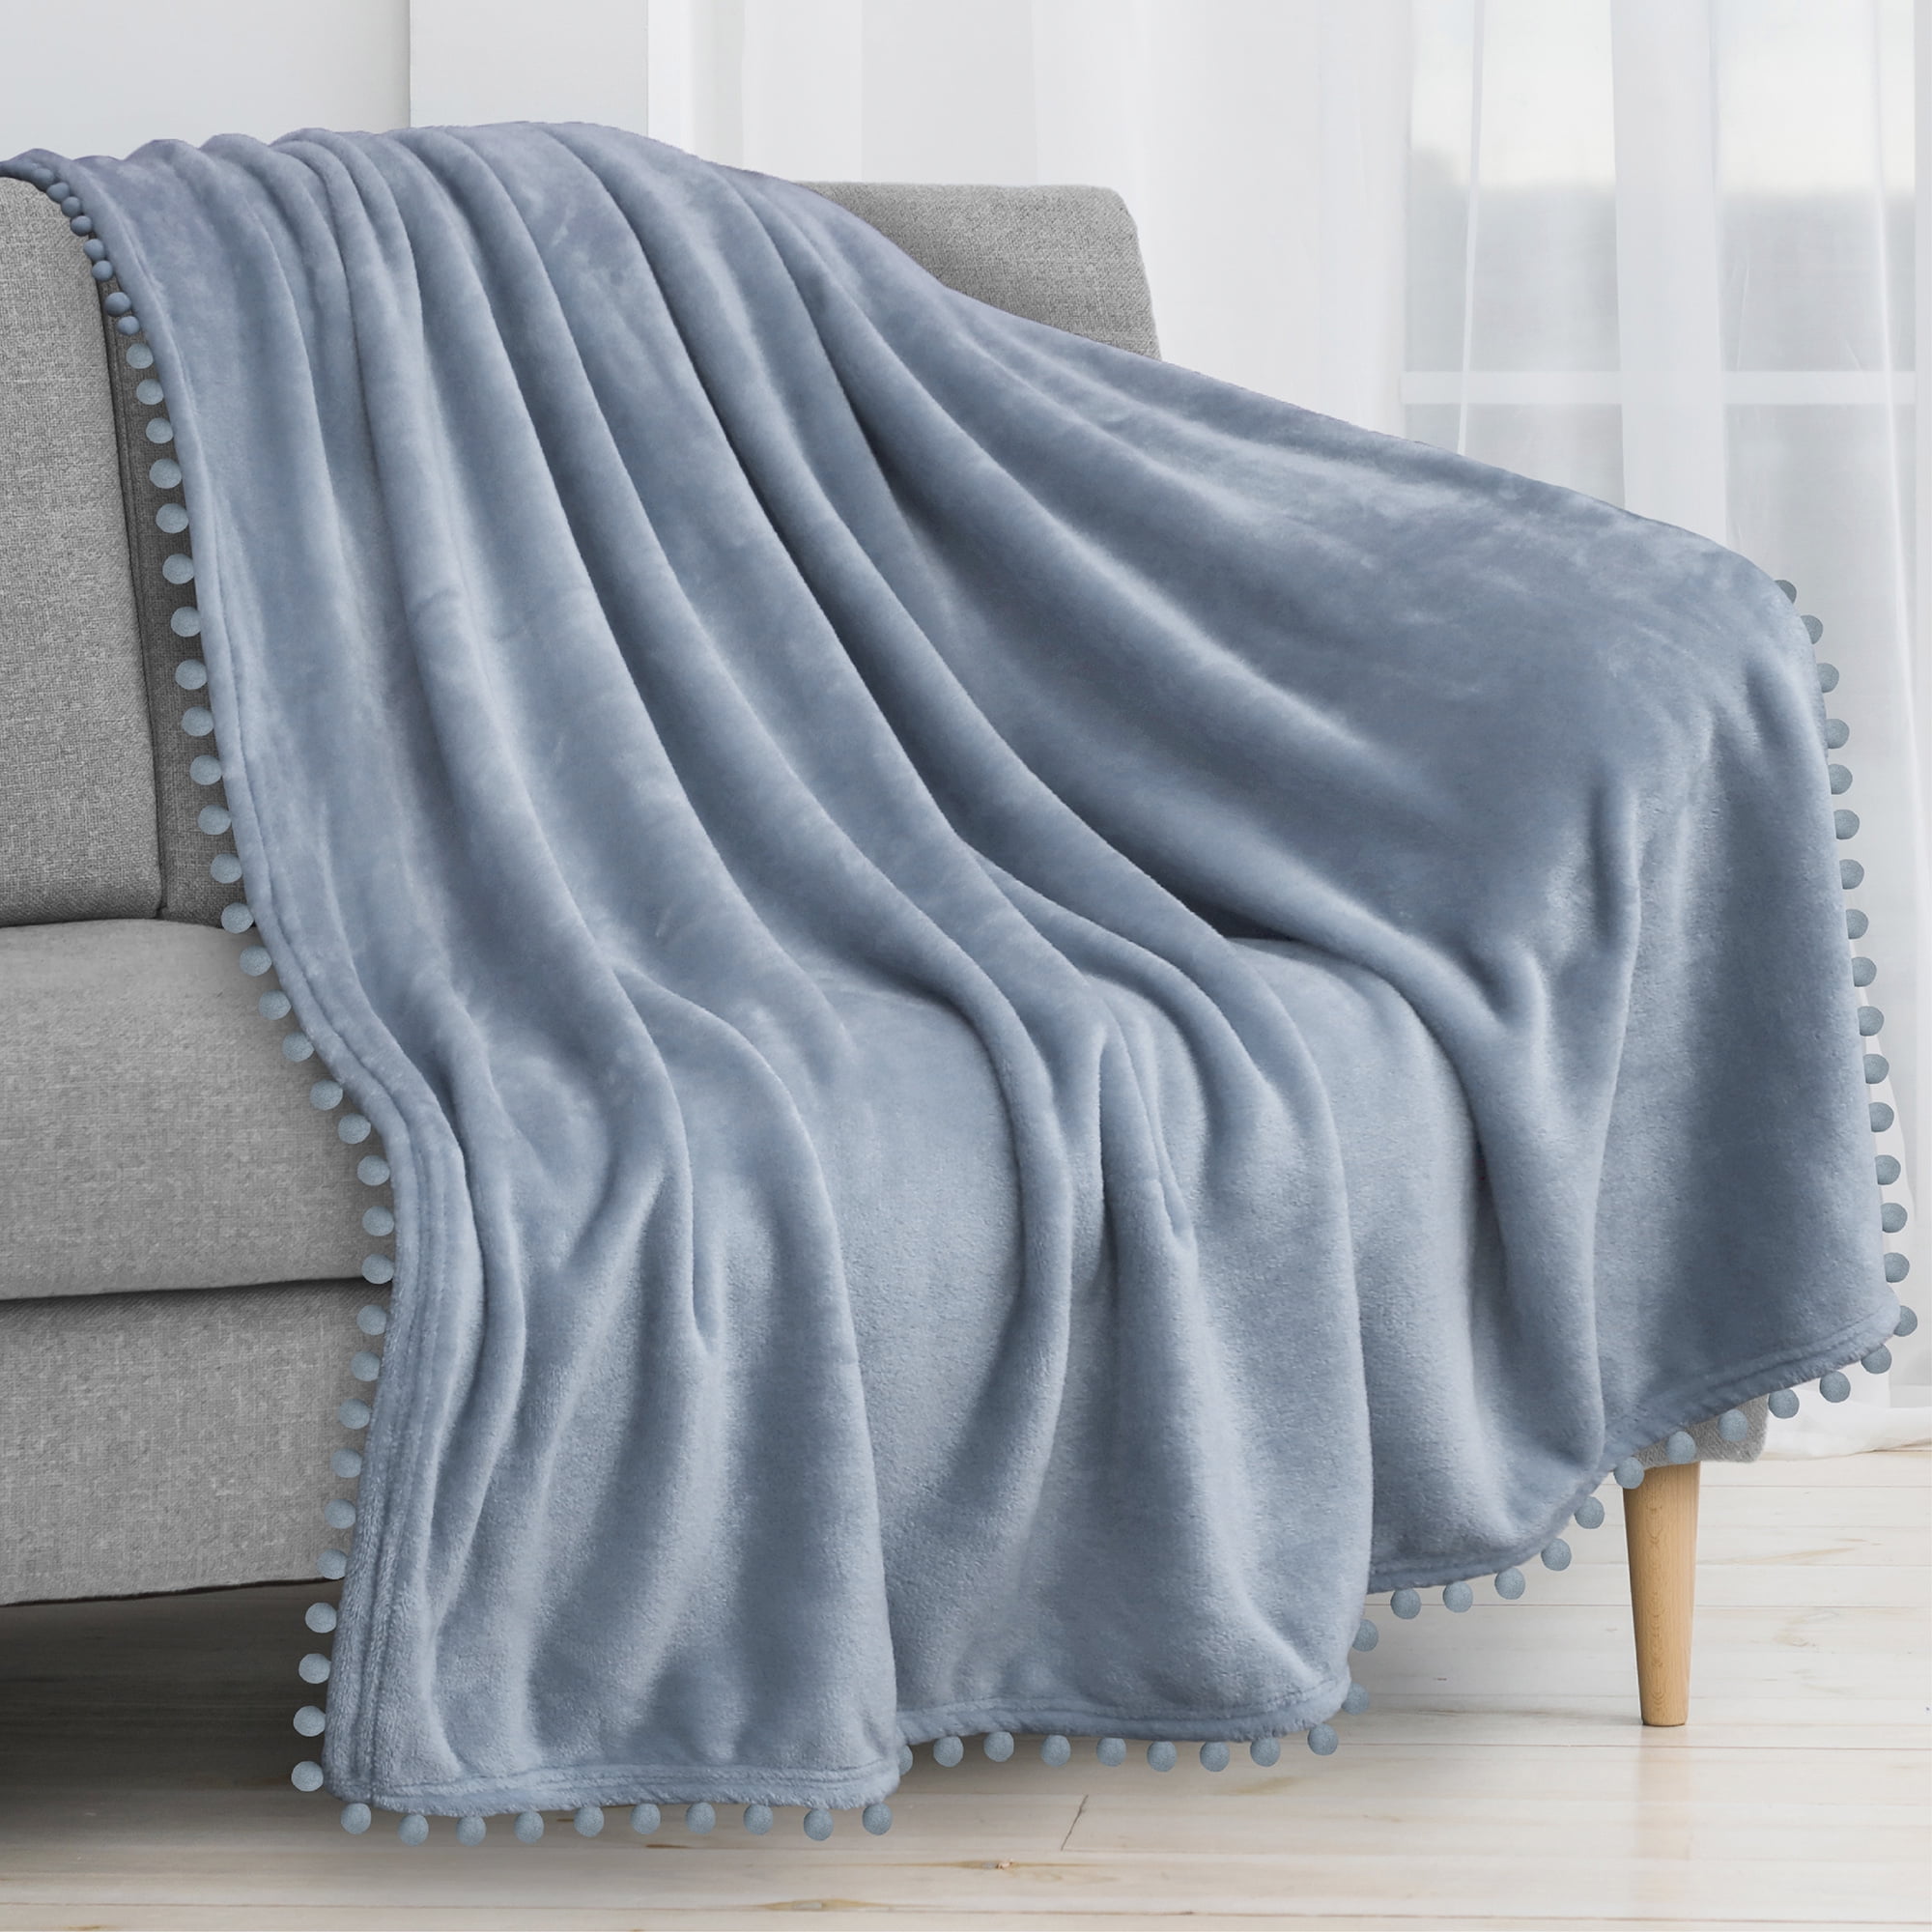 Premium Soft Throw Blankets with Pompom Tassels Suit for Travel Bed Sofa Lightweight Cozy Baby Bed Blanket Couch Light Grey, 60x 80 Flannel Throw Blankets